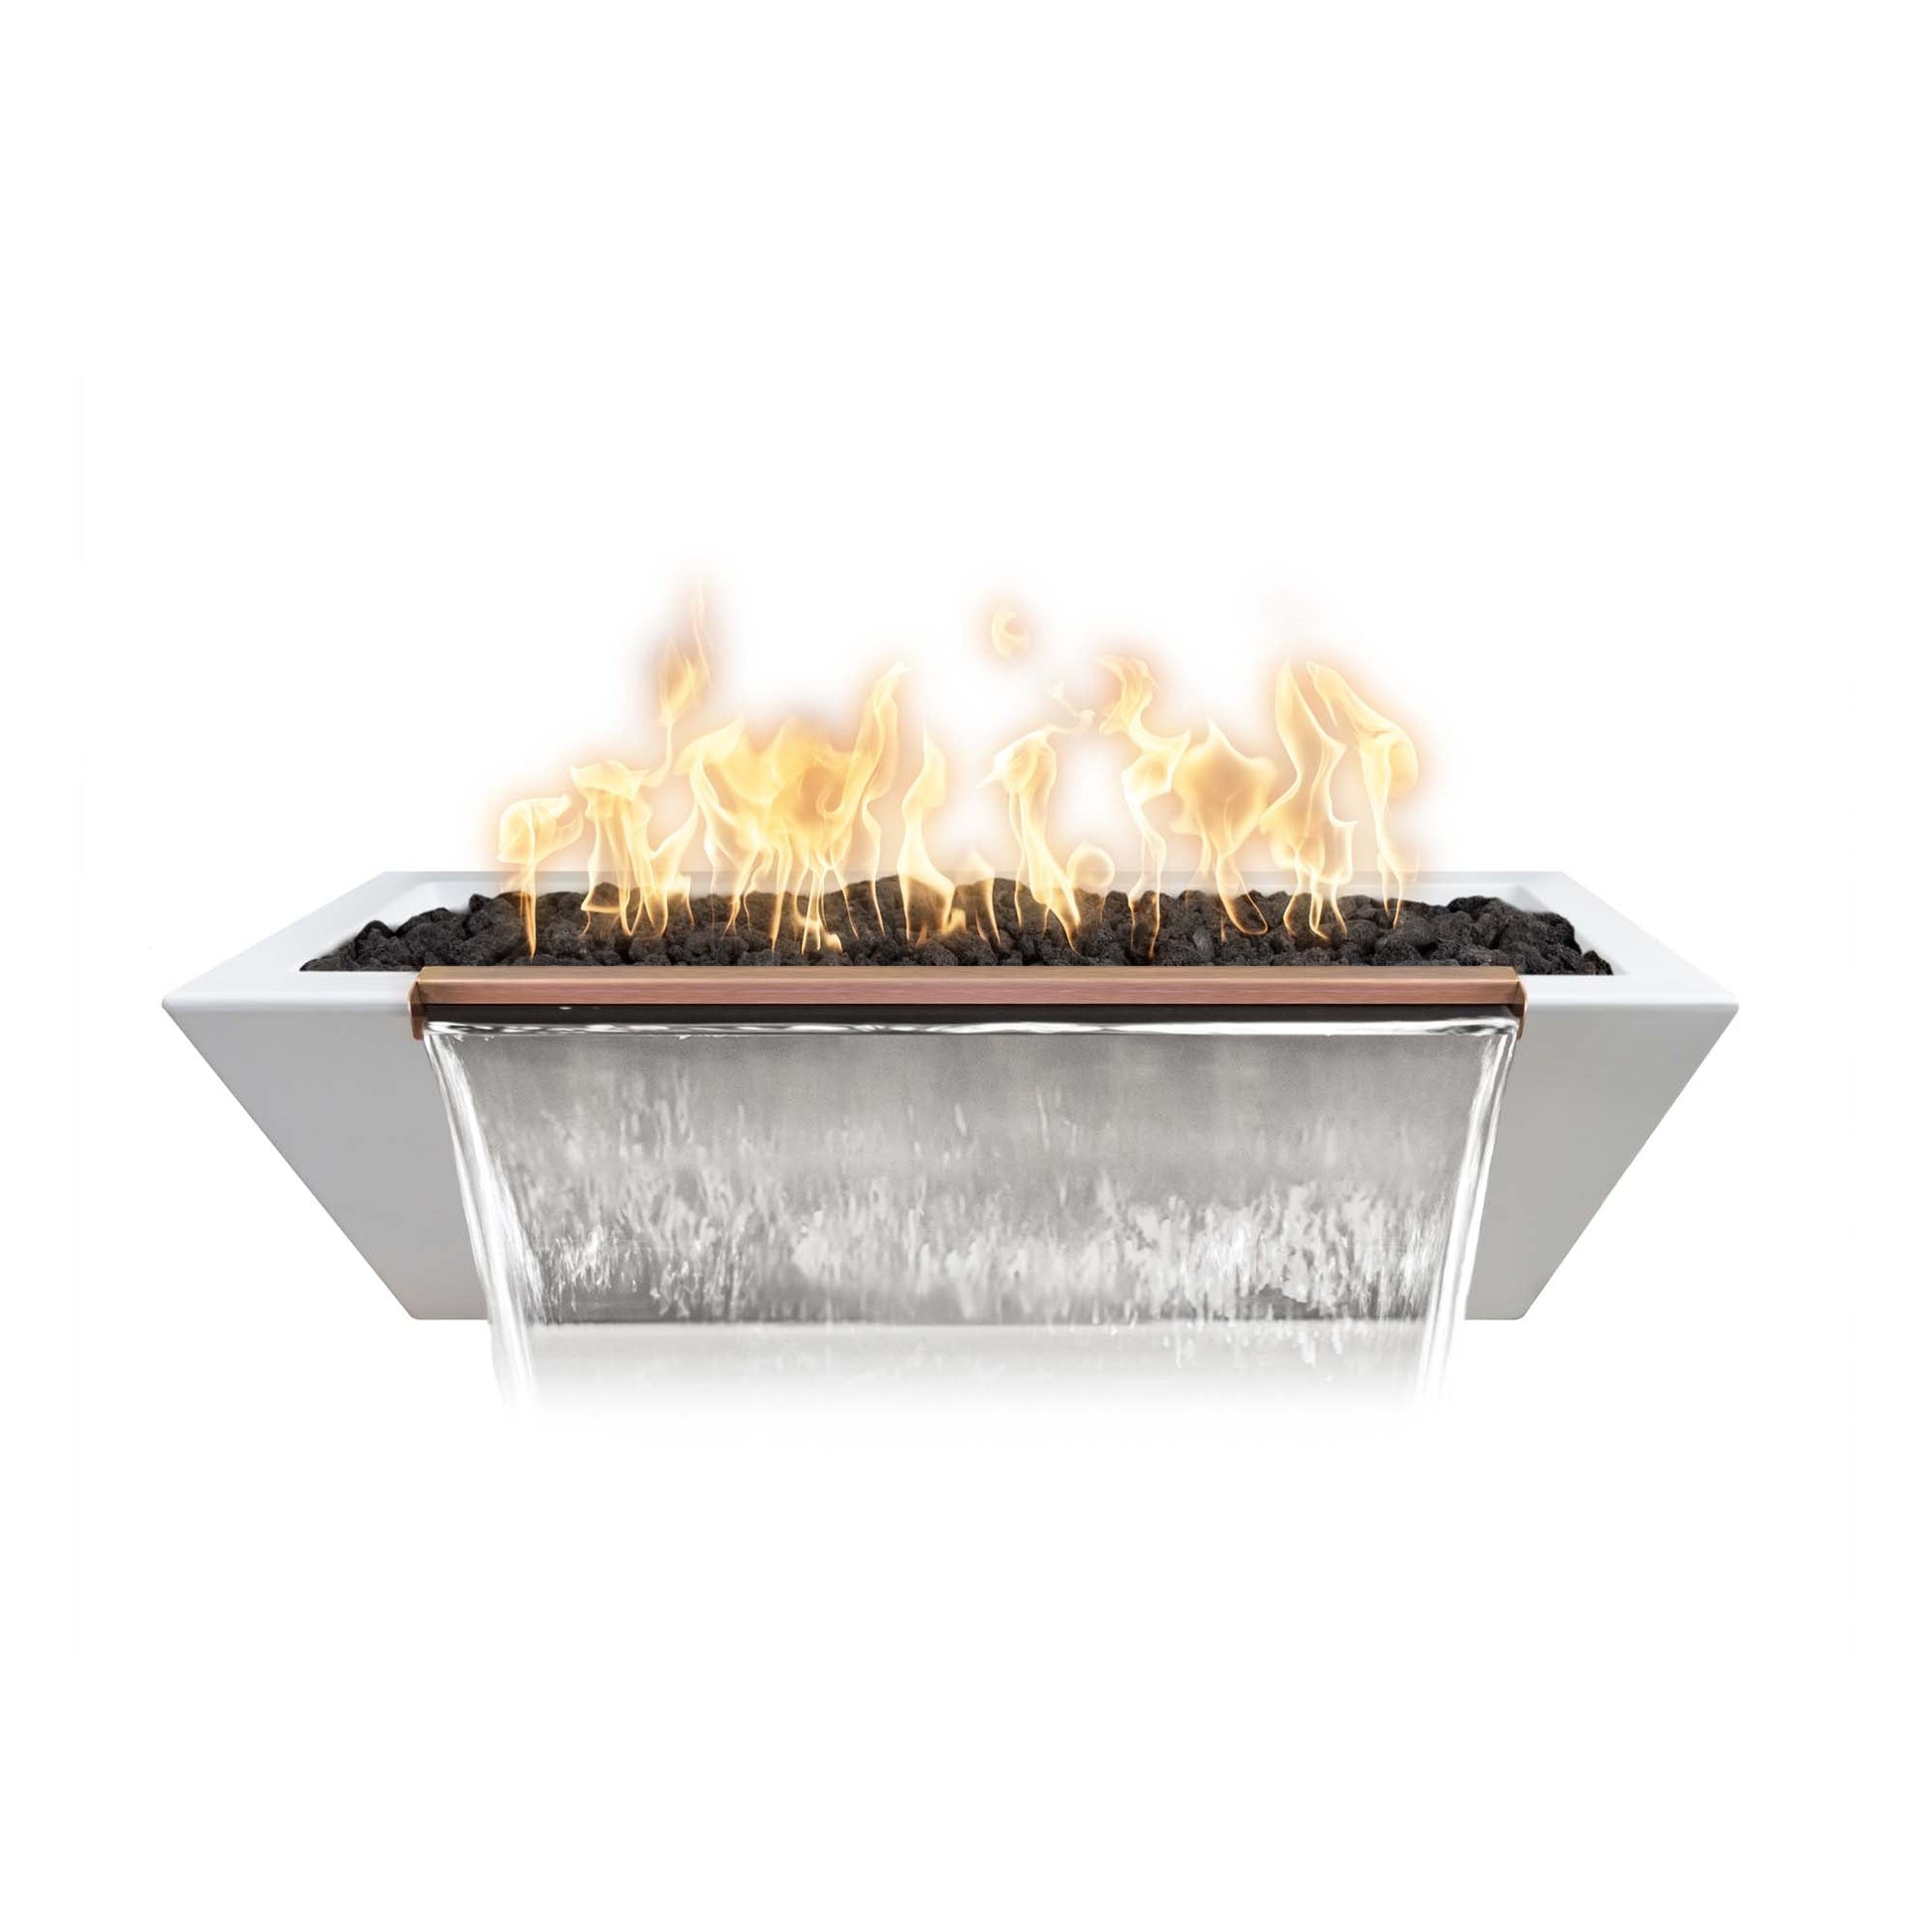 The Outdoor Plus Linear Maya 60" Metallic Pearl GFRC Concrete Liquid Propane Fire & Water Bowl with Match Lit Ignition